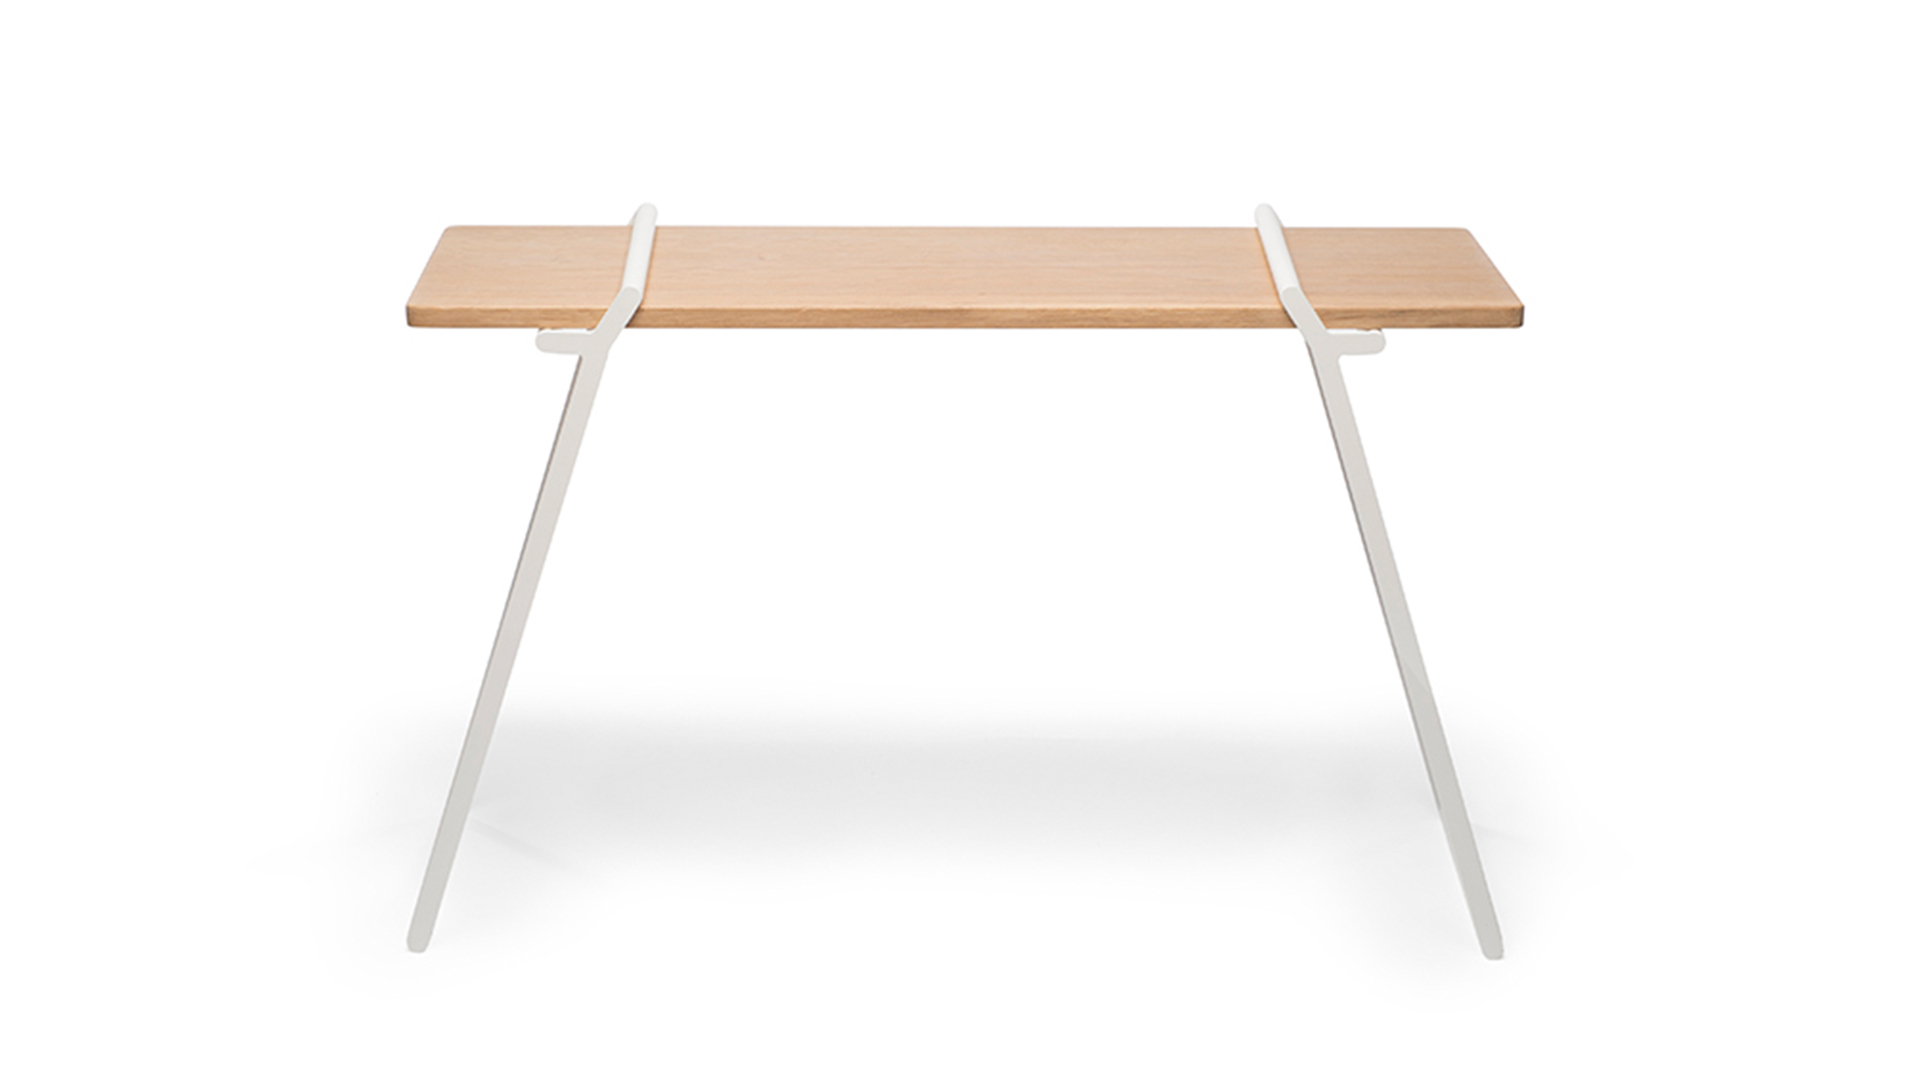 Flat wood table with rectangular legs at either end